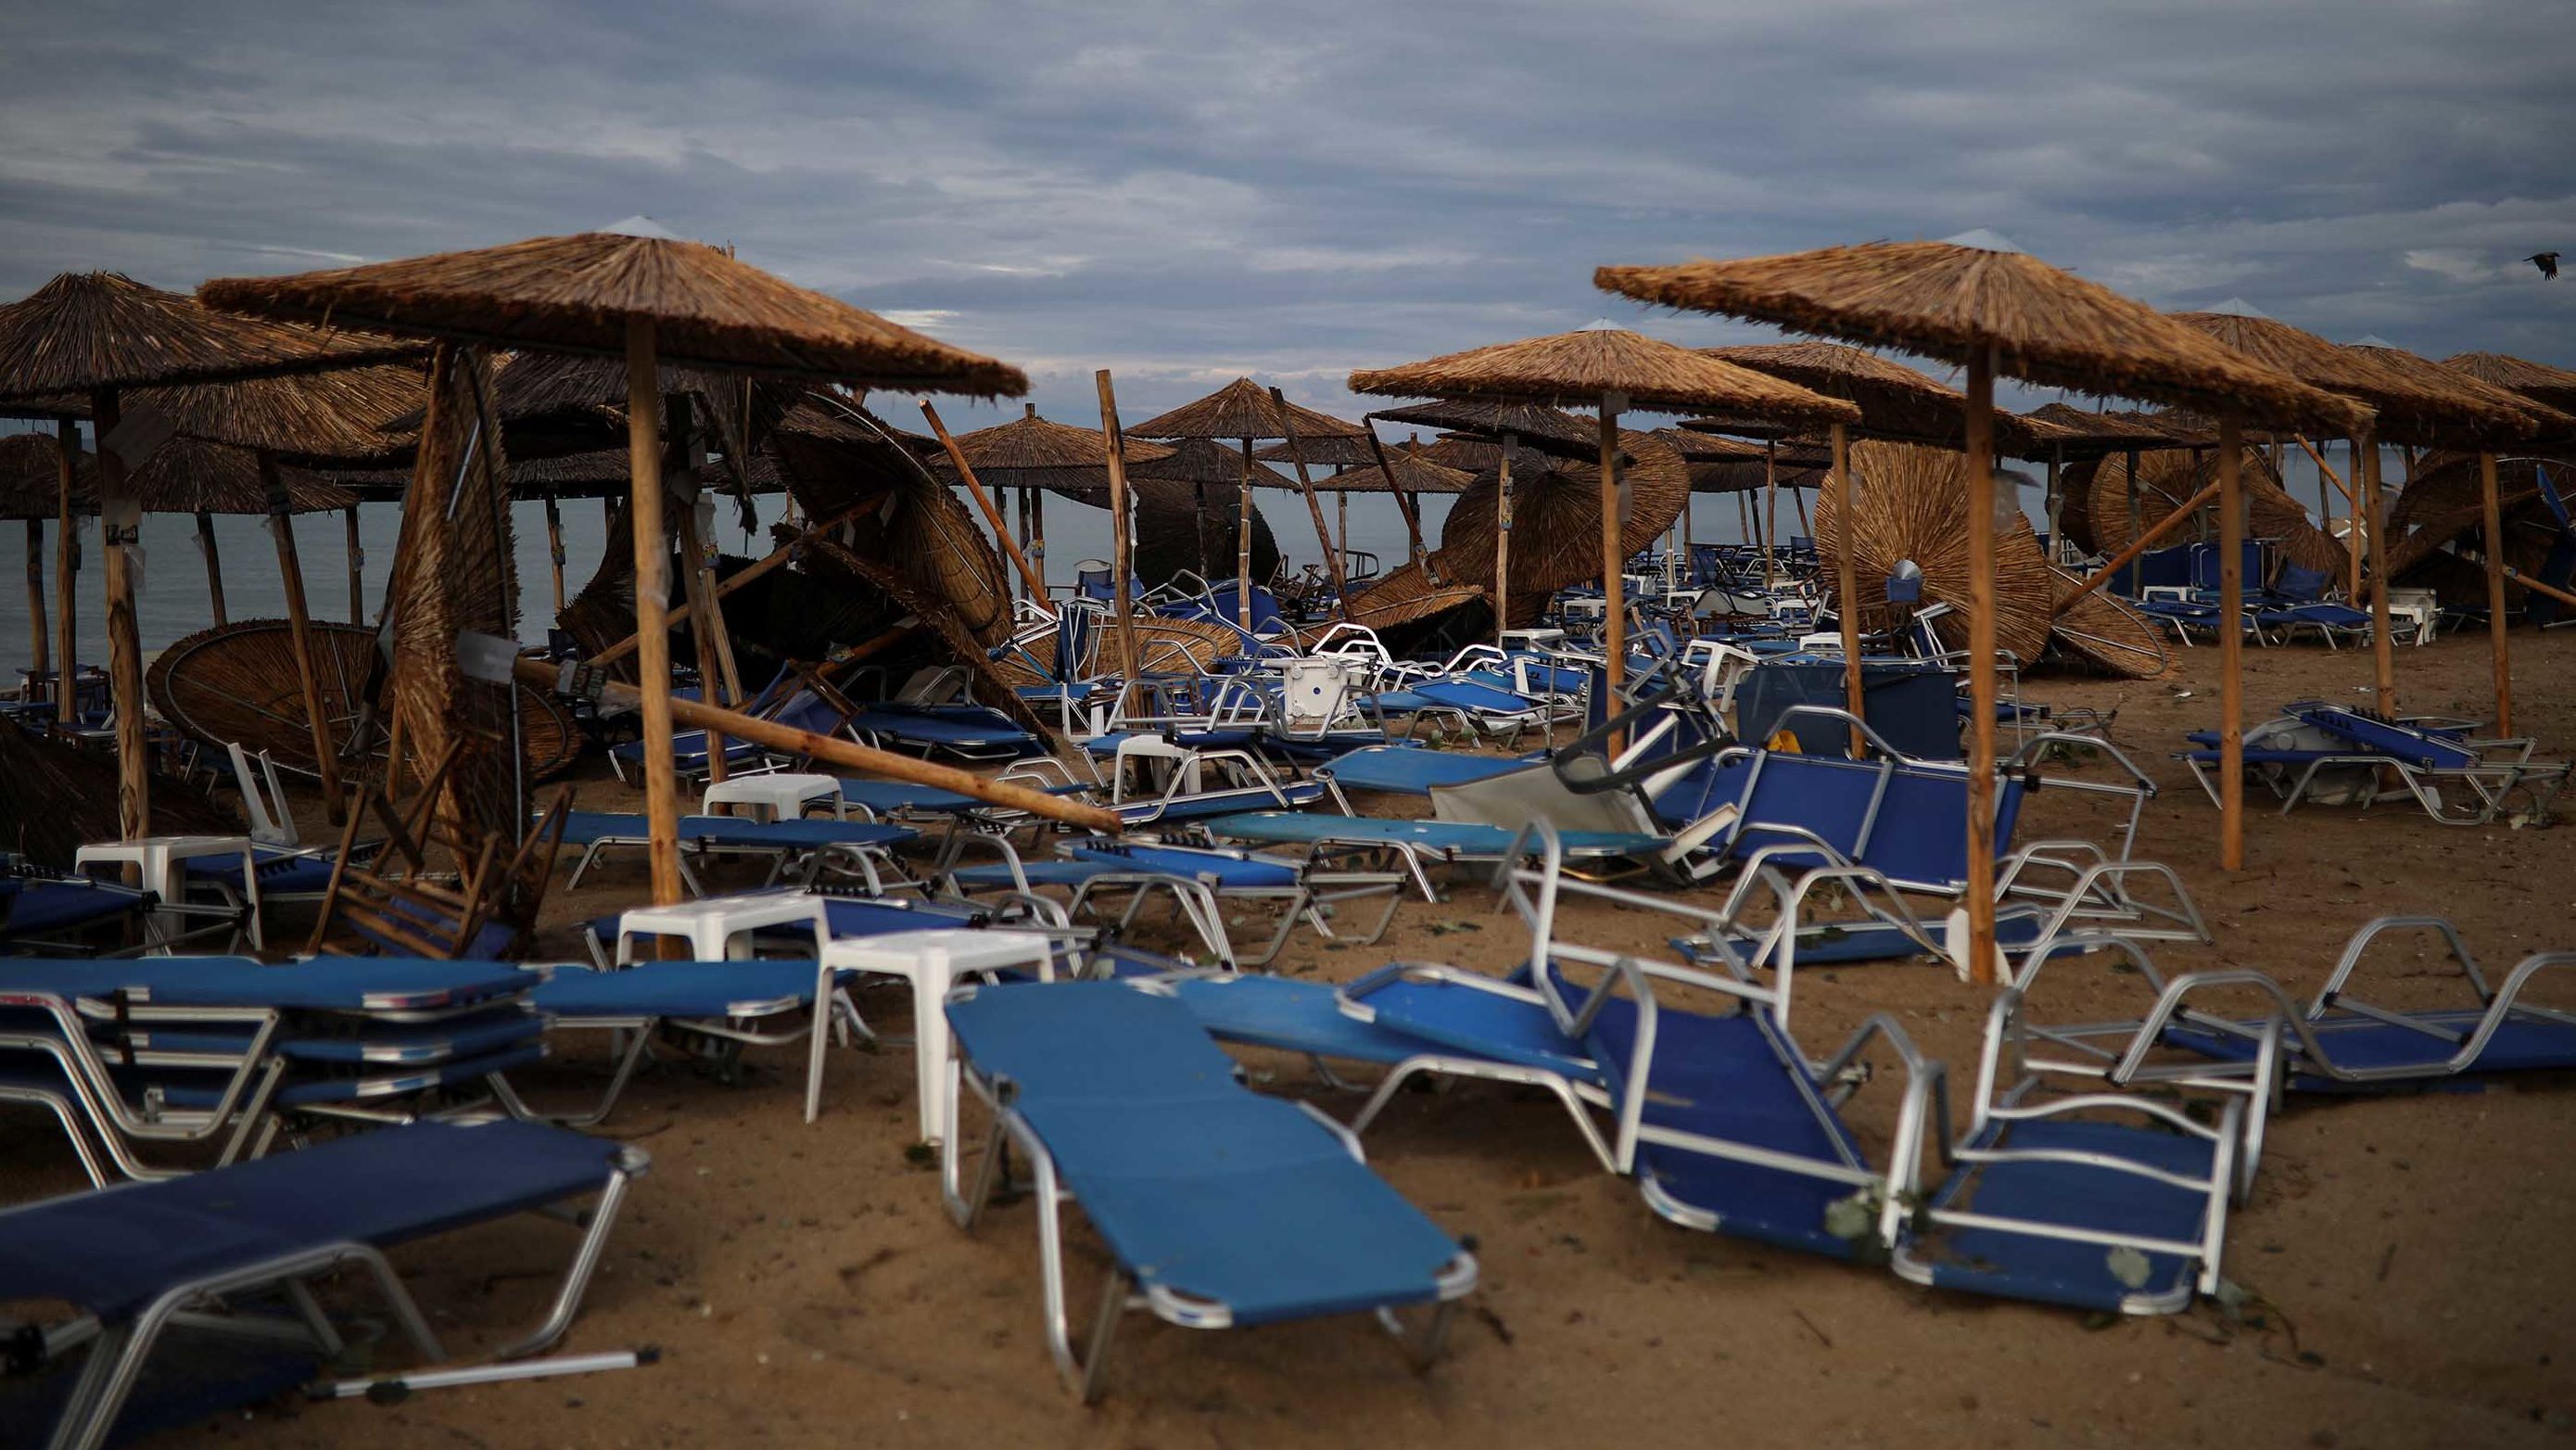 Six people were killed in the freak storm that hit northern Greece Wednesday.